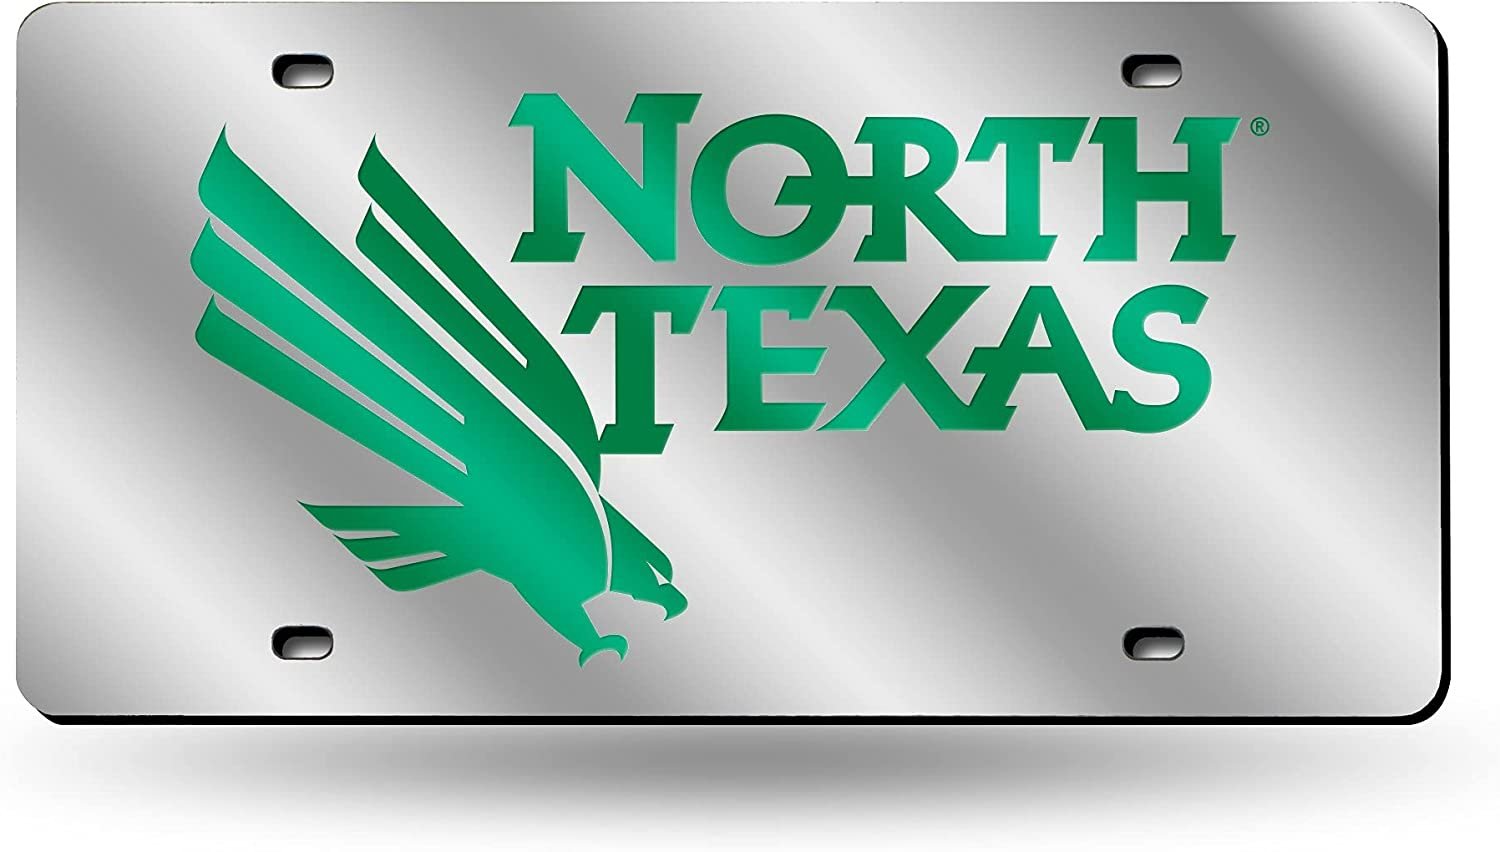 University of North Texas Mean Green Premium Laser Cut Tag License Plate, Mirrored Acrylic Inlaid, 12x6 Inch